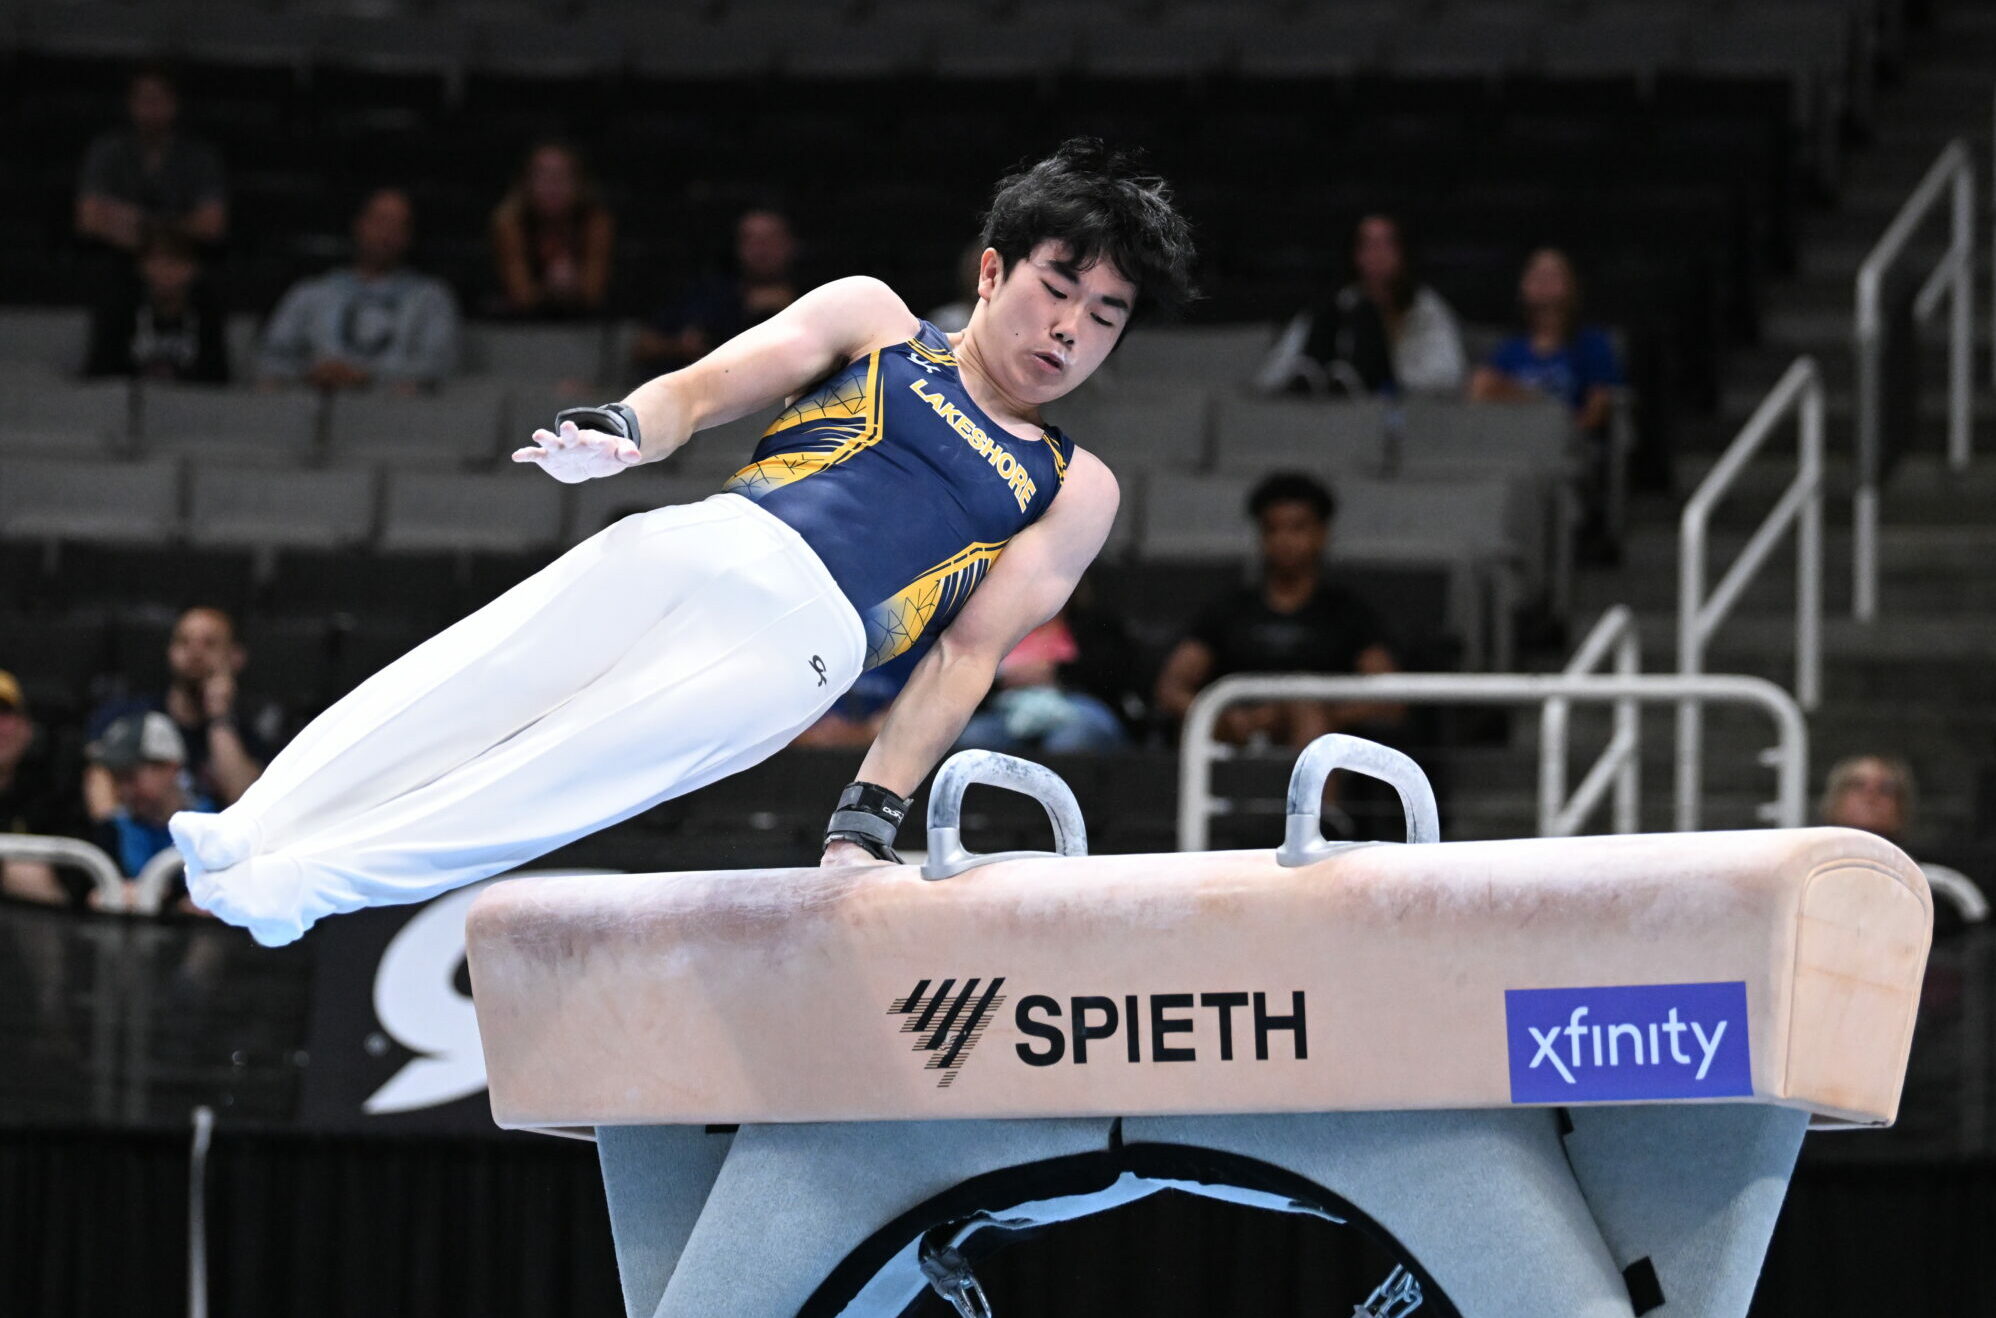 Kai Uemura swings pommel horse during Day 2 of junior men's competition at the 2023 Xfinity U.S. Gymnastics Championships.